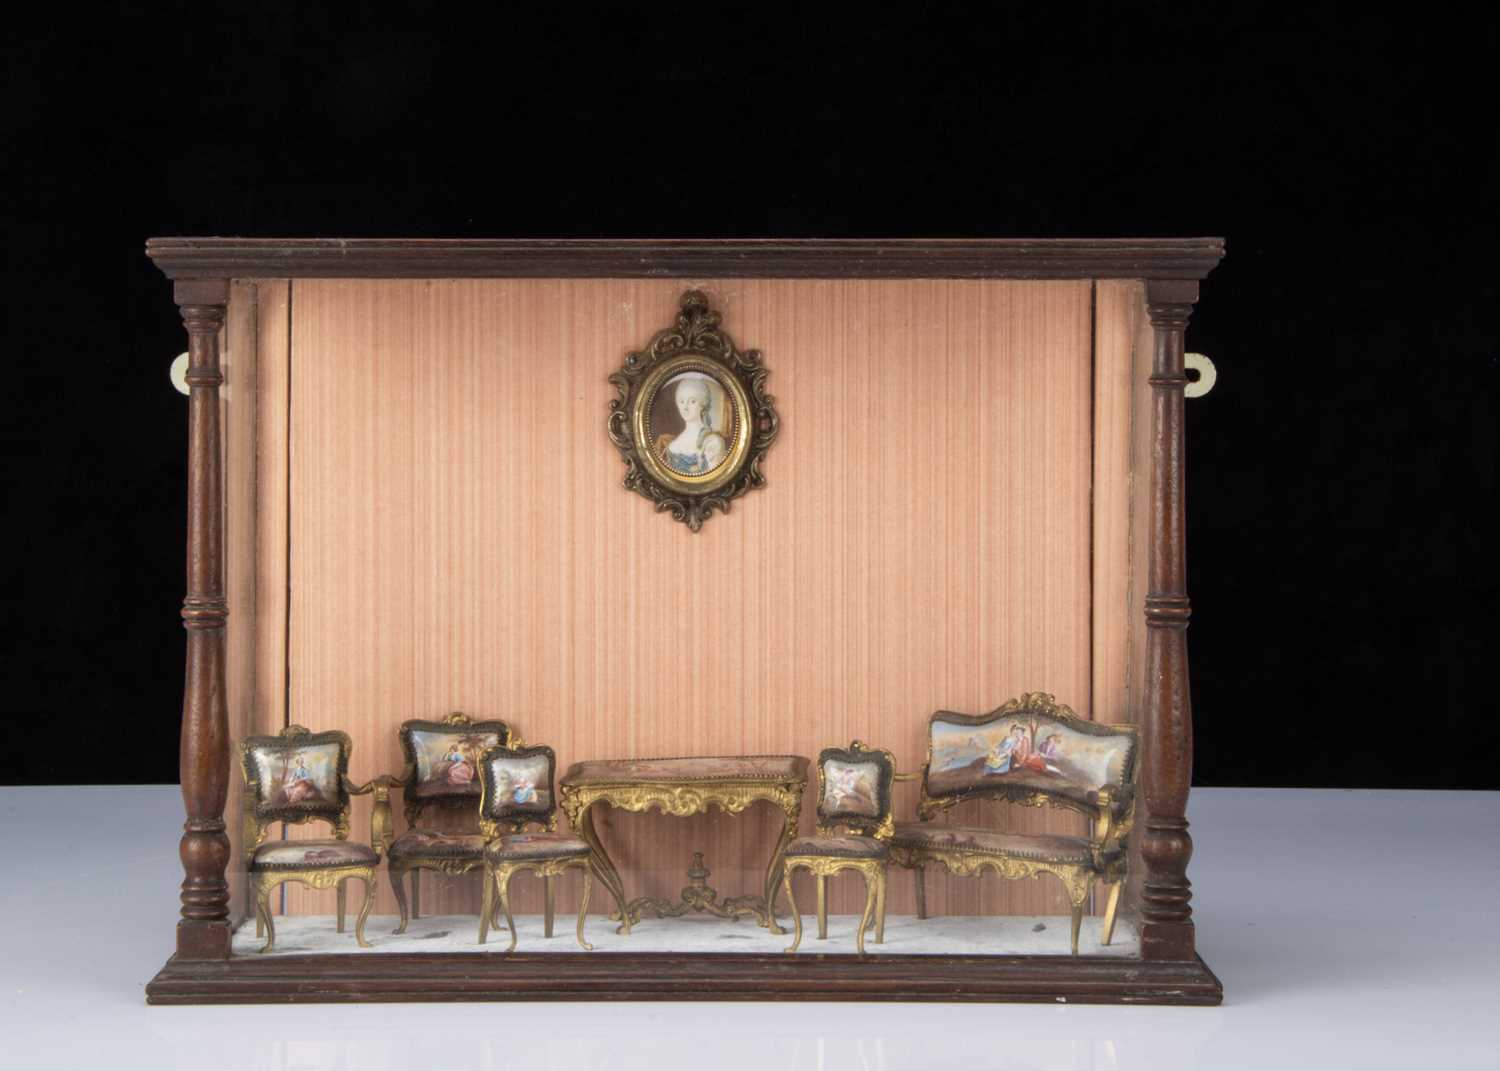 A set of early 20th century Viennese enamel and gilt metal dolls’ house furniture, - Image 3 of 3